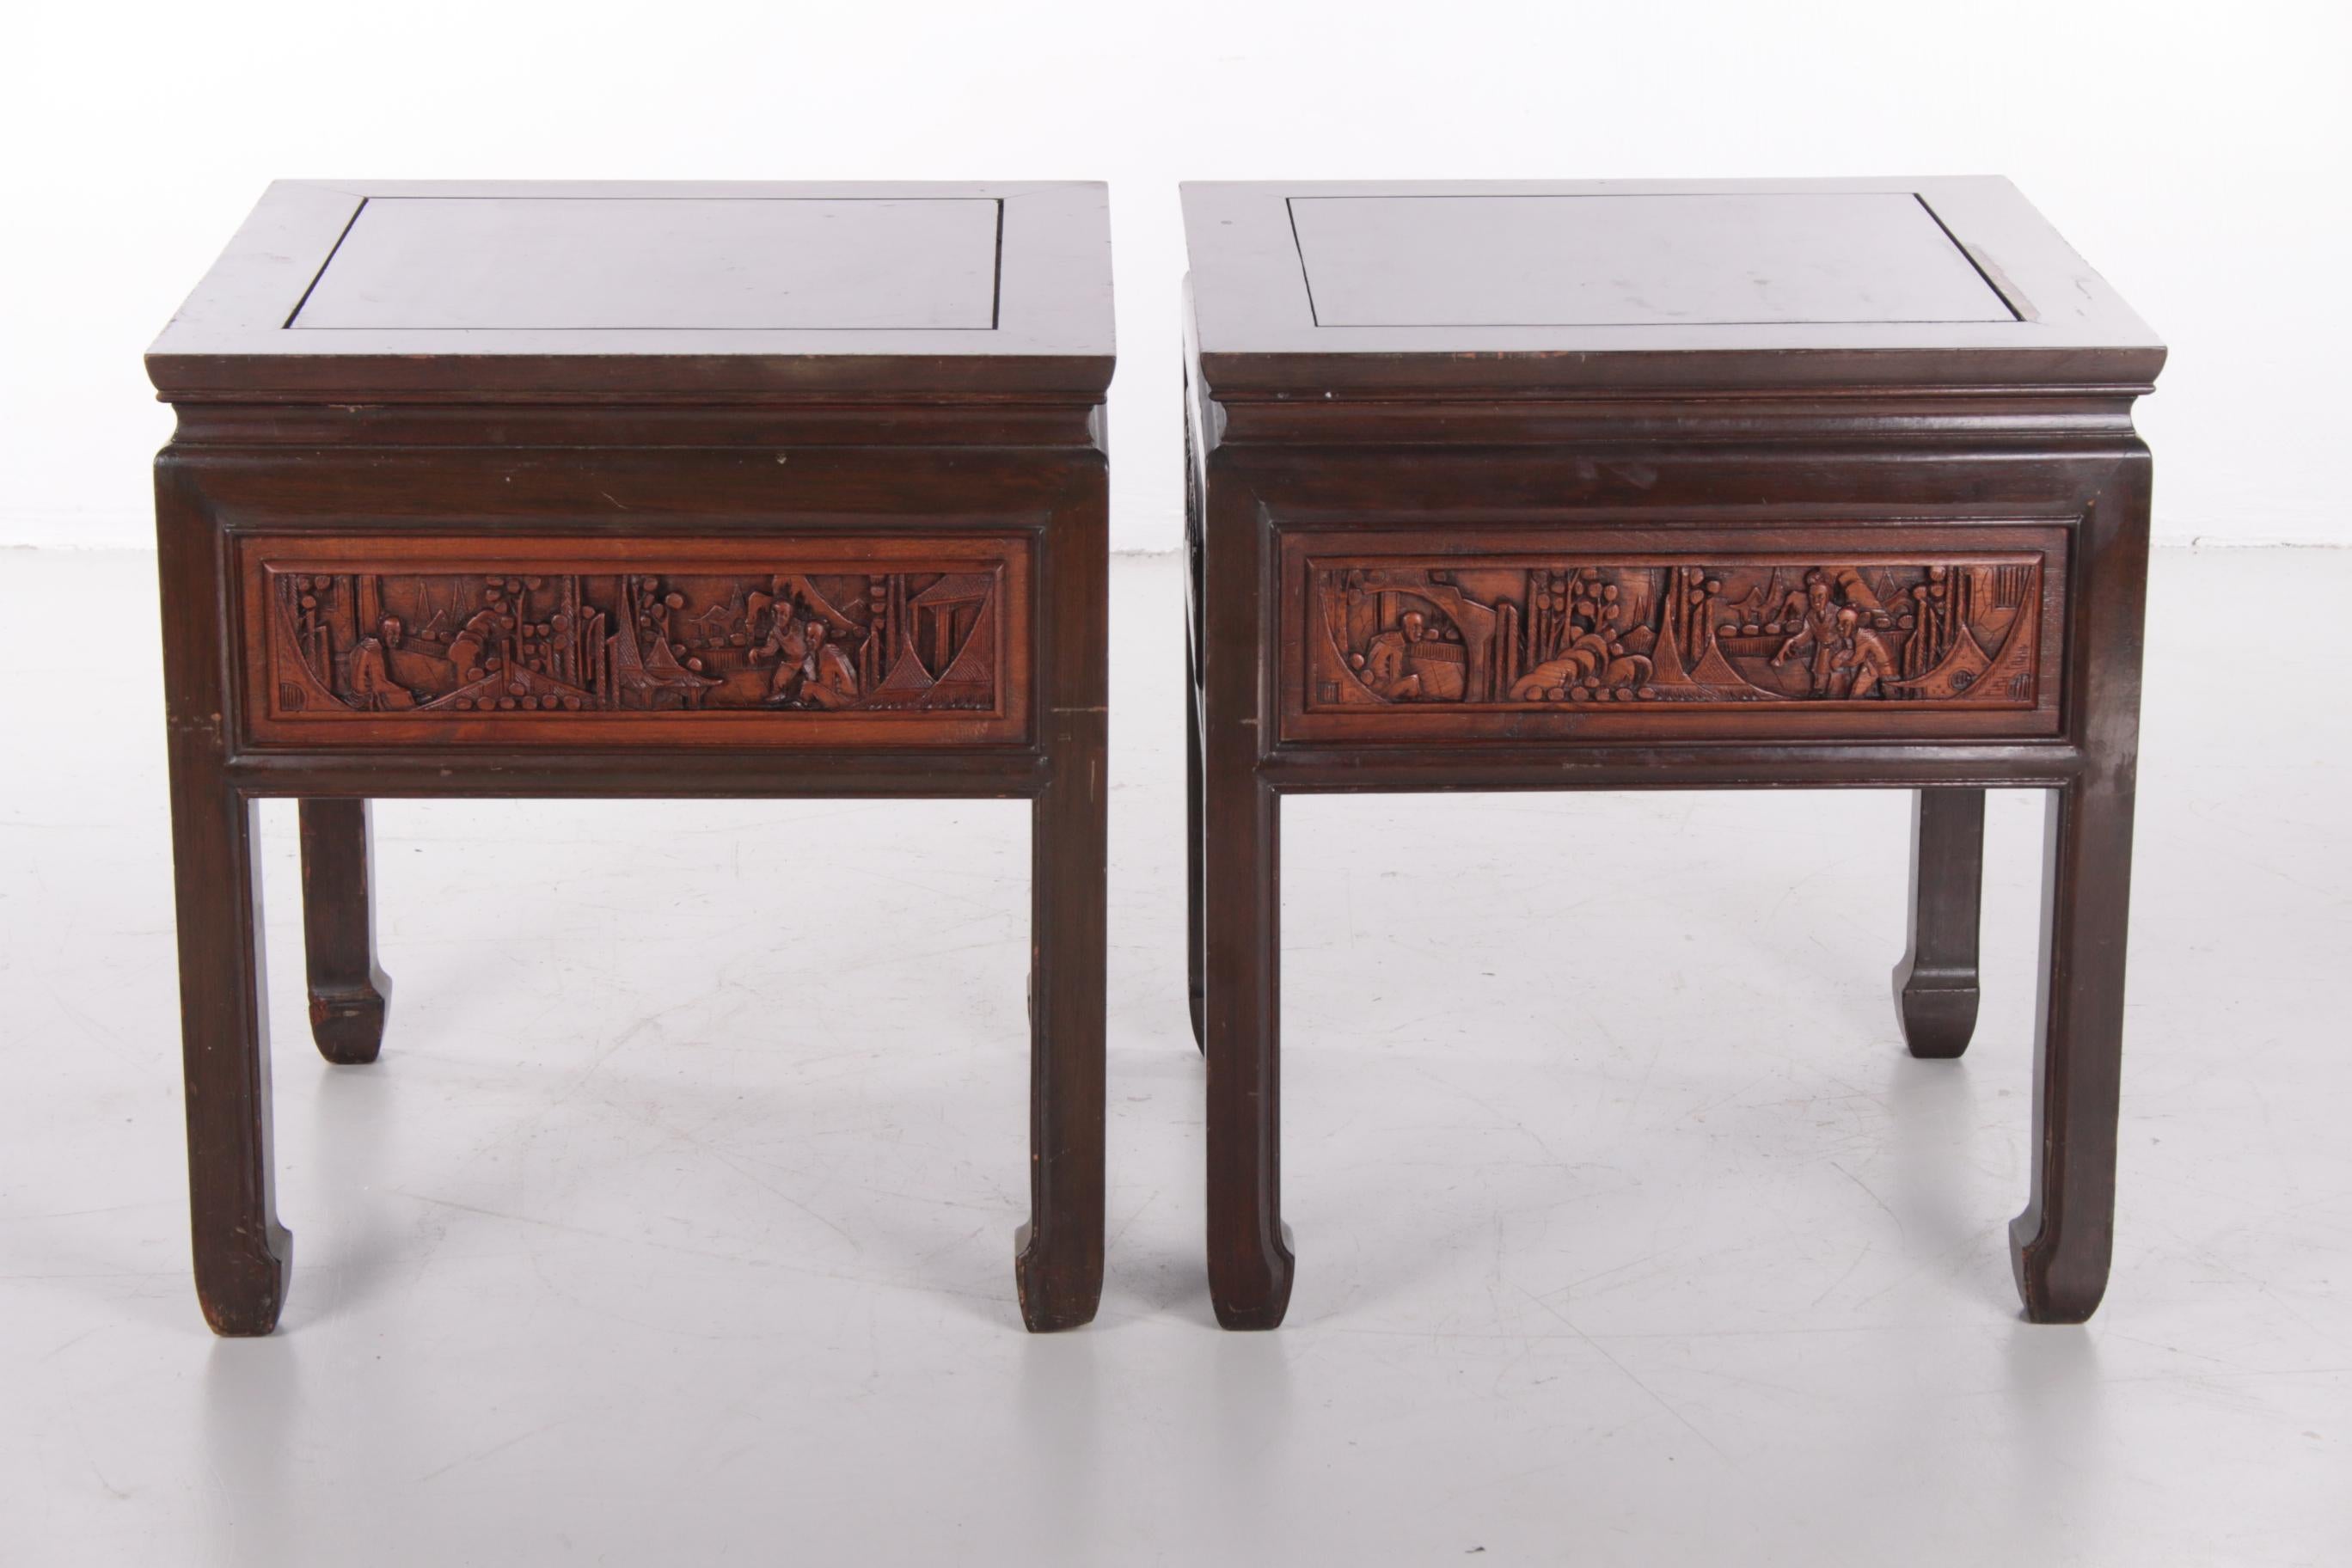 20th Century Chinese Wooden Bedside Tables with Beautiful Hand Carving 7